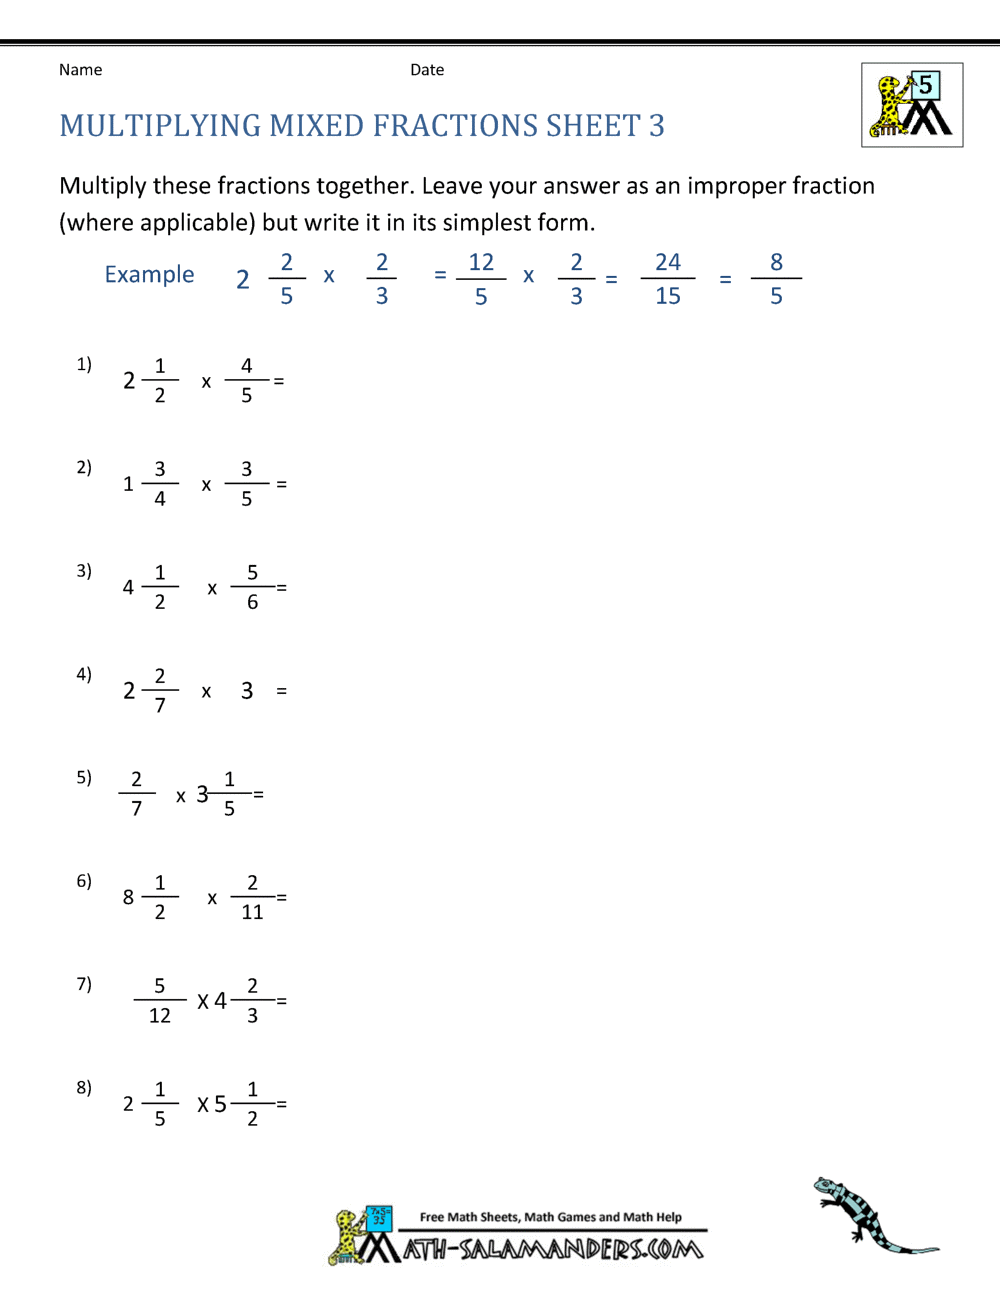 Multiplying Mixed Fractions For Multiplying Mixed Fractions Worksheet